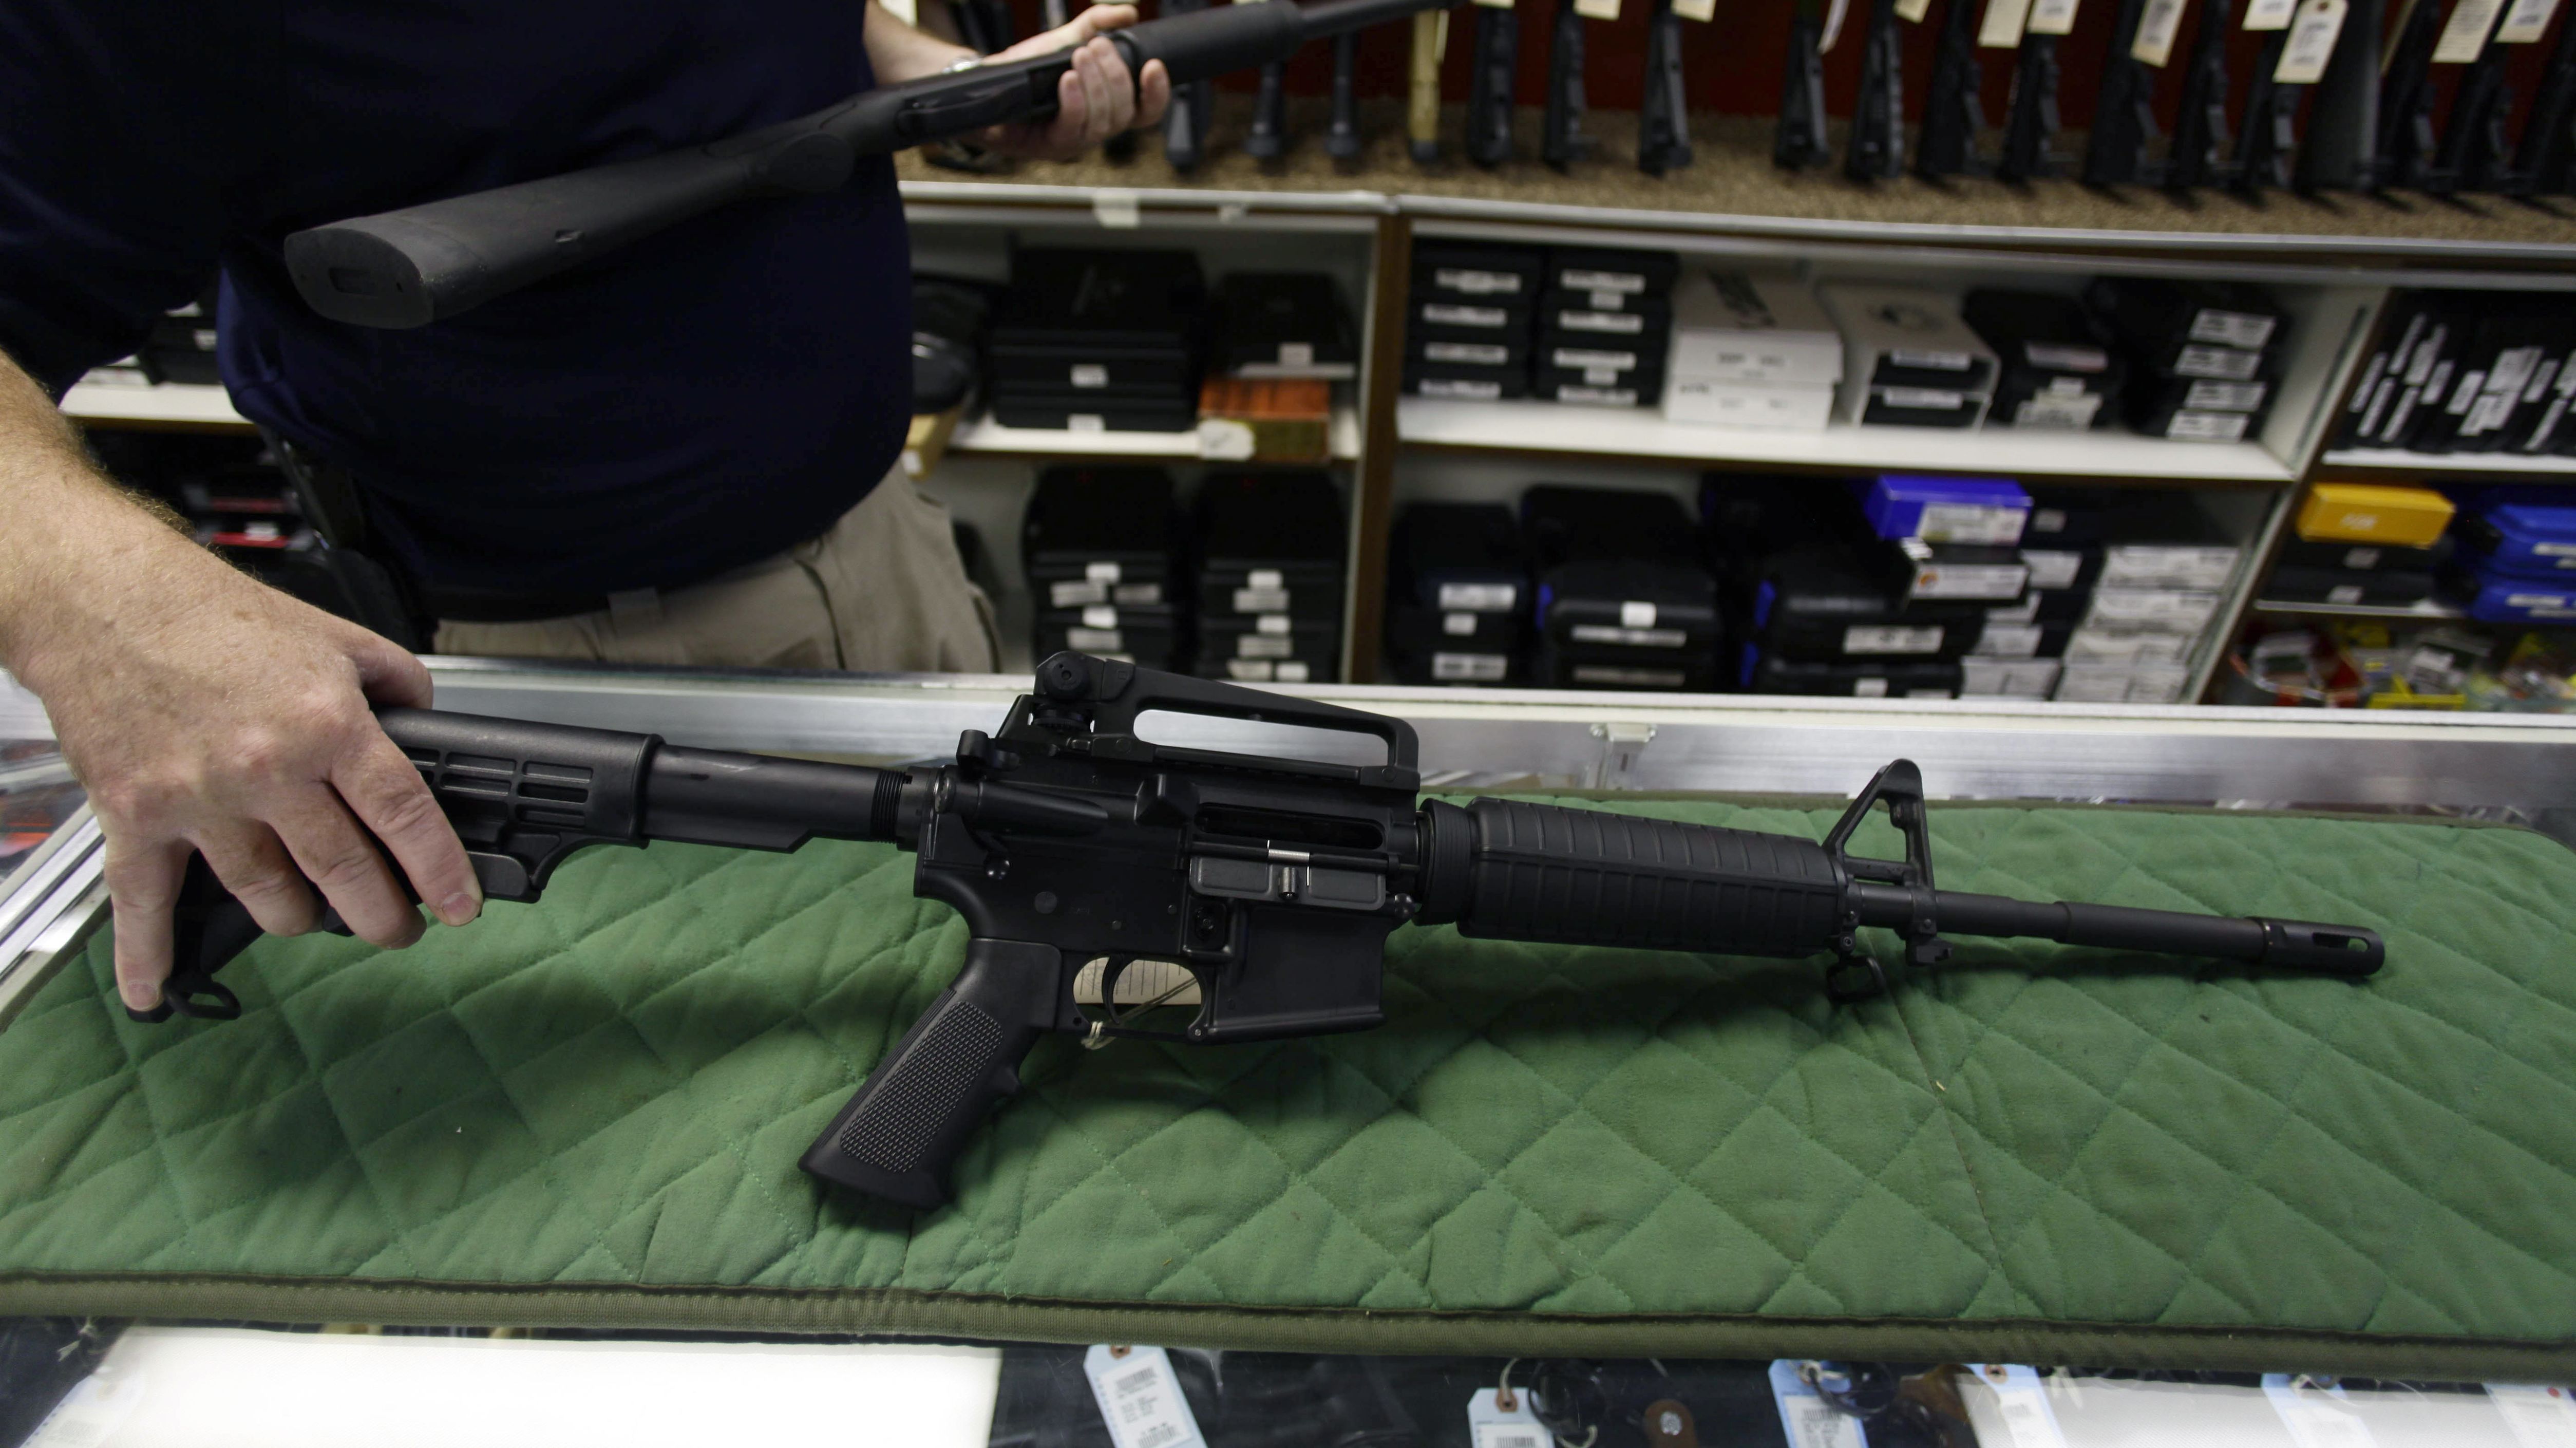 A Bush Master AR-15 assault rifle similar to one used in Friday's rampage is displayed Sunday at a gun shop in Aurora, Colorado. 